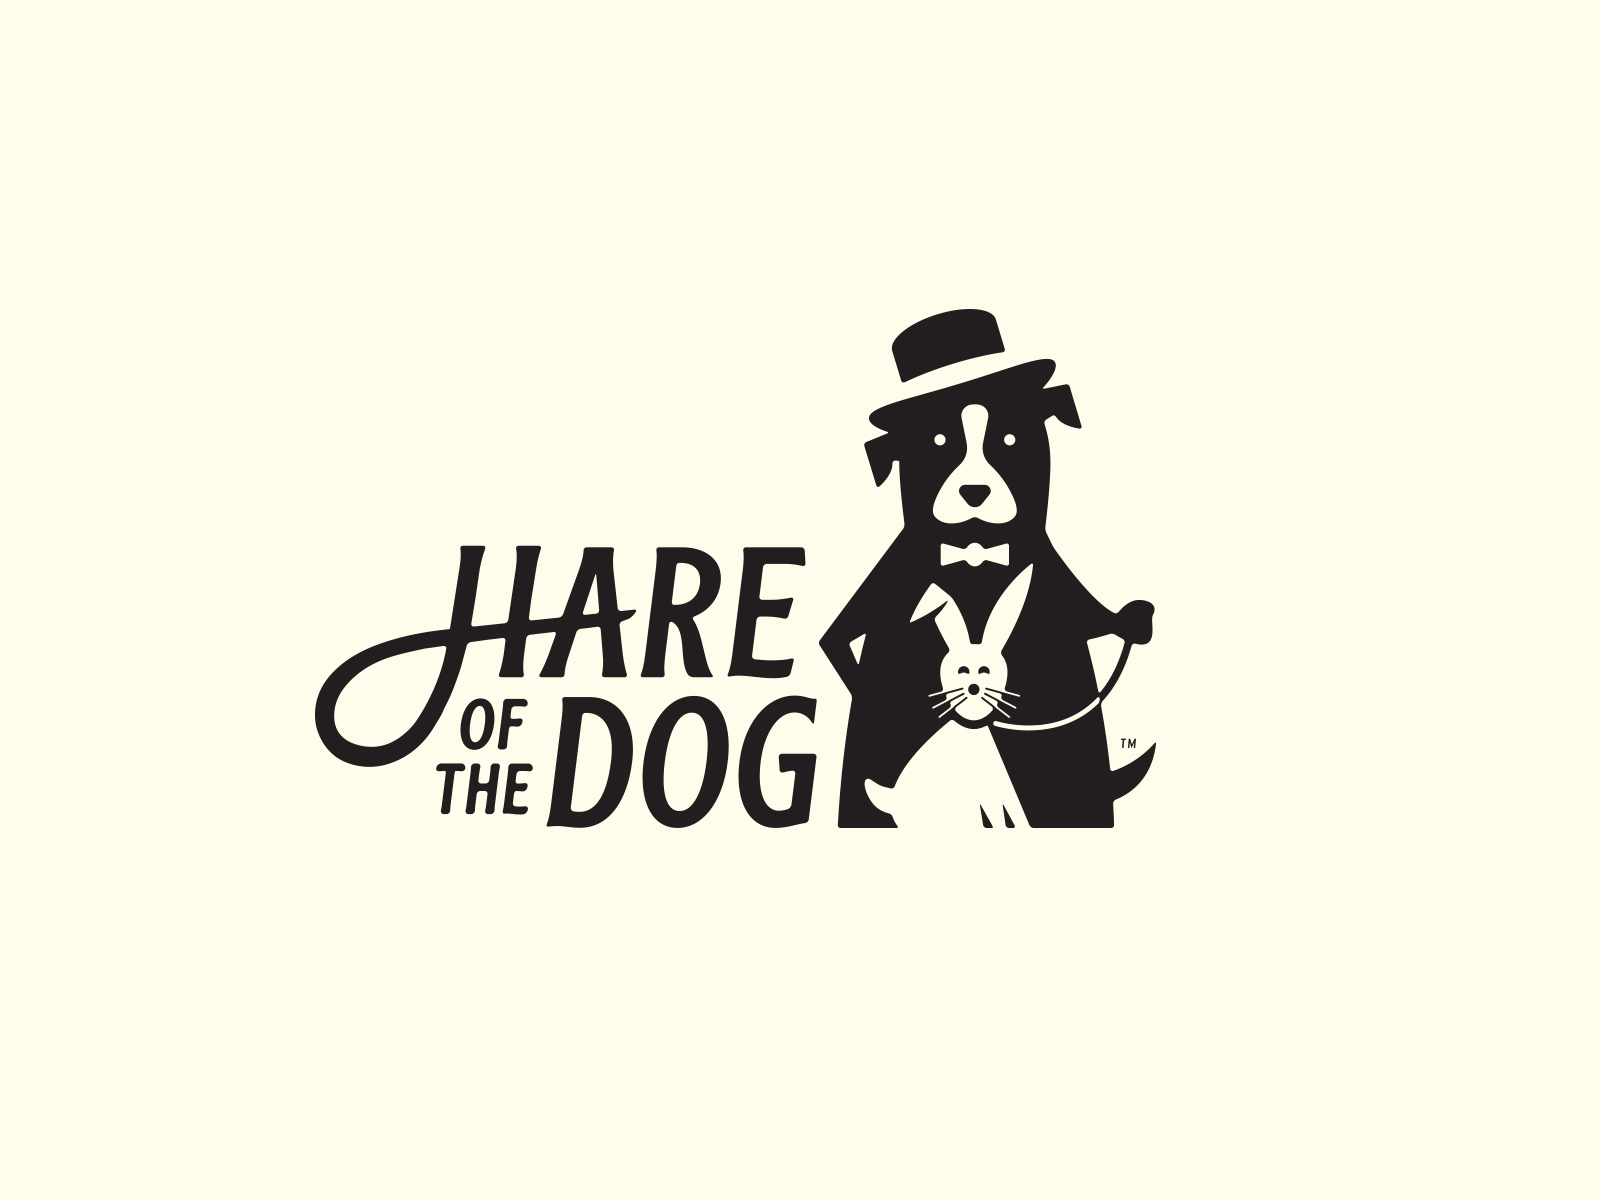 Hare of the Dog - Branding by Emir Ayouni on Dribbble